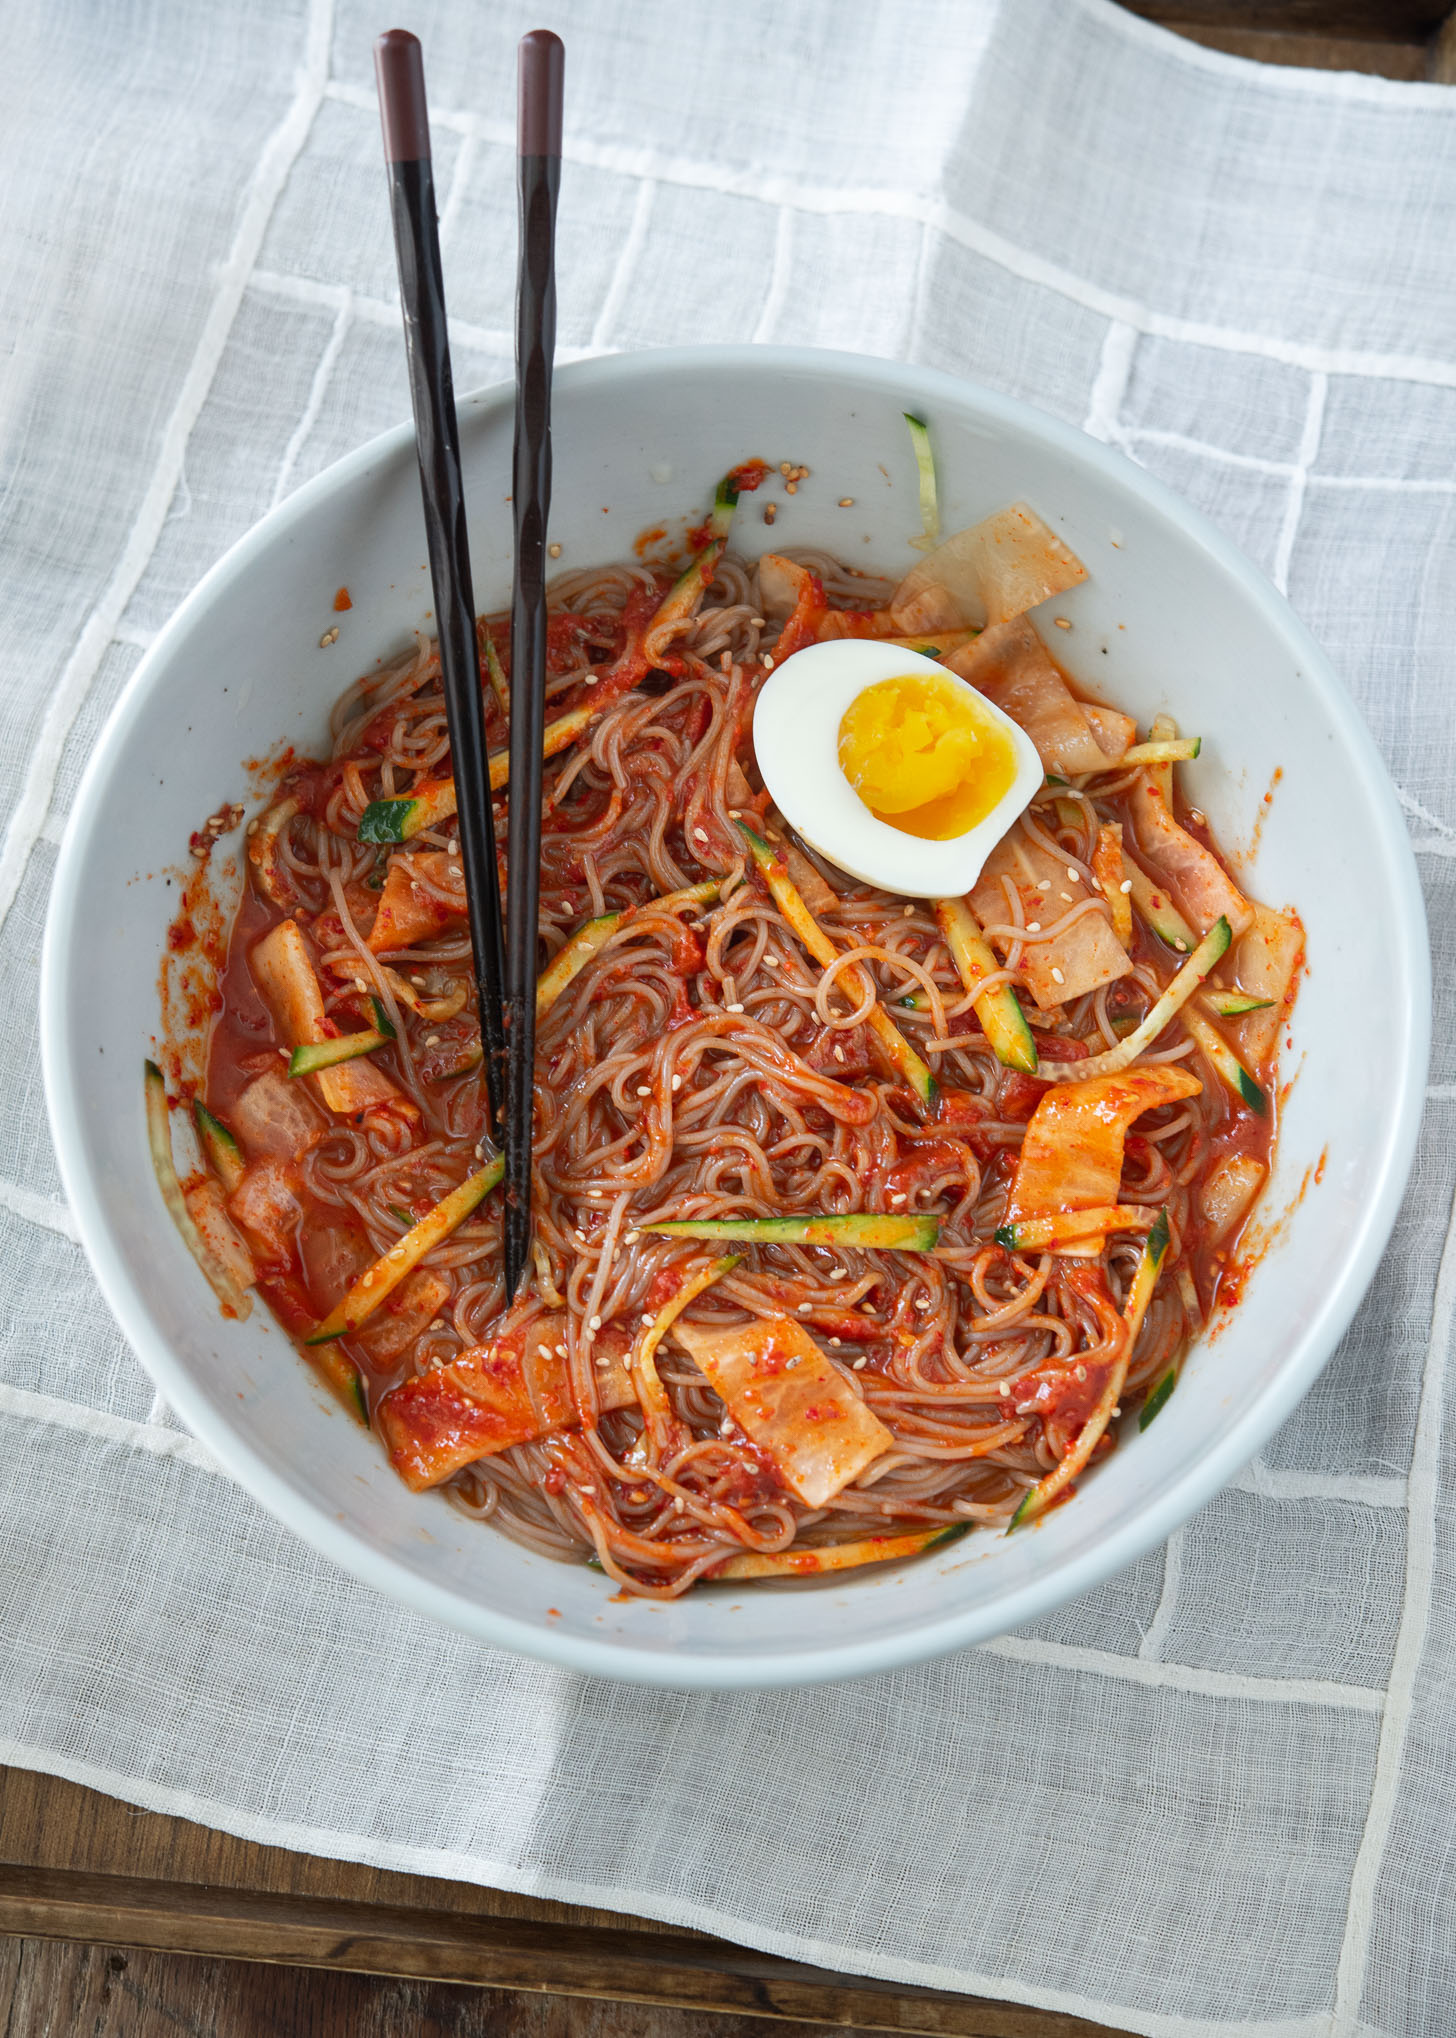 Spicy bibim naengmyeon (cold noodles) mixed with the sauce.